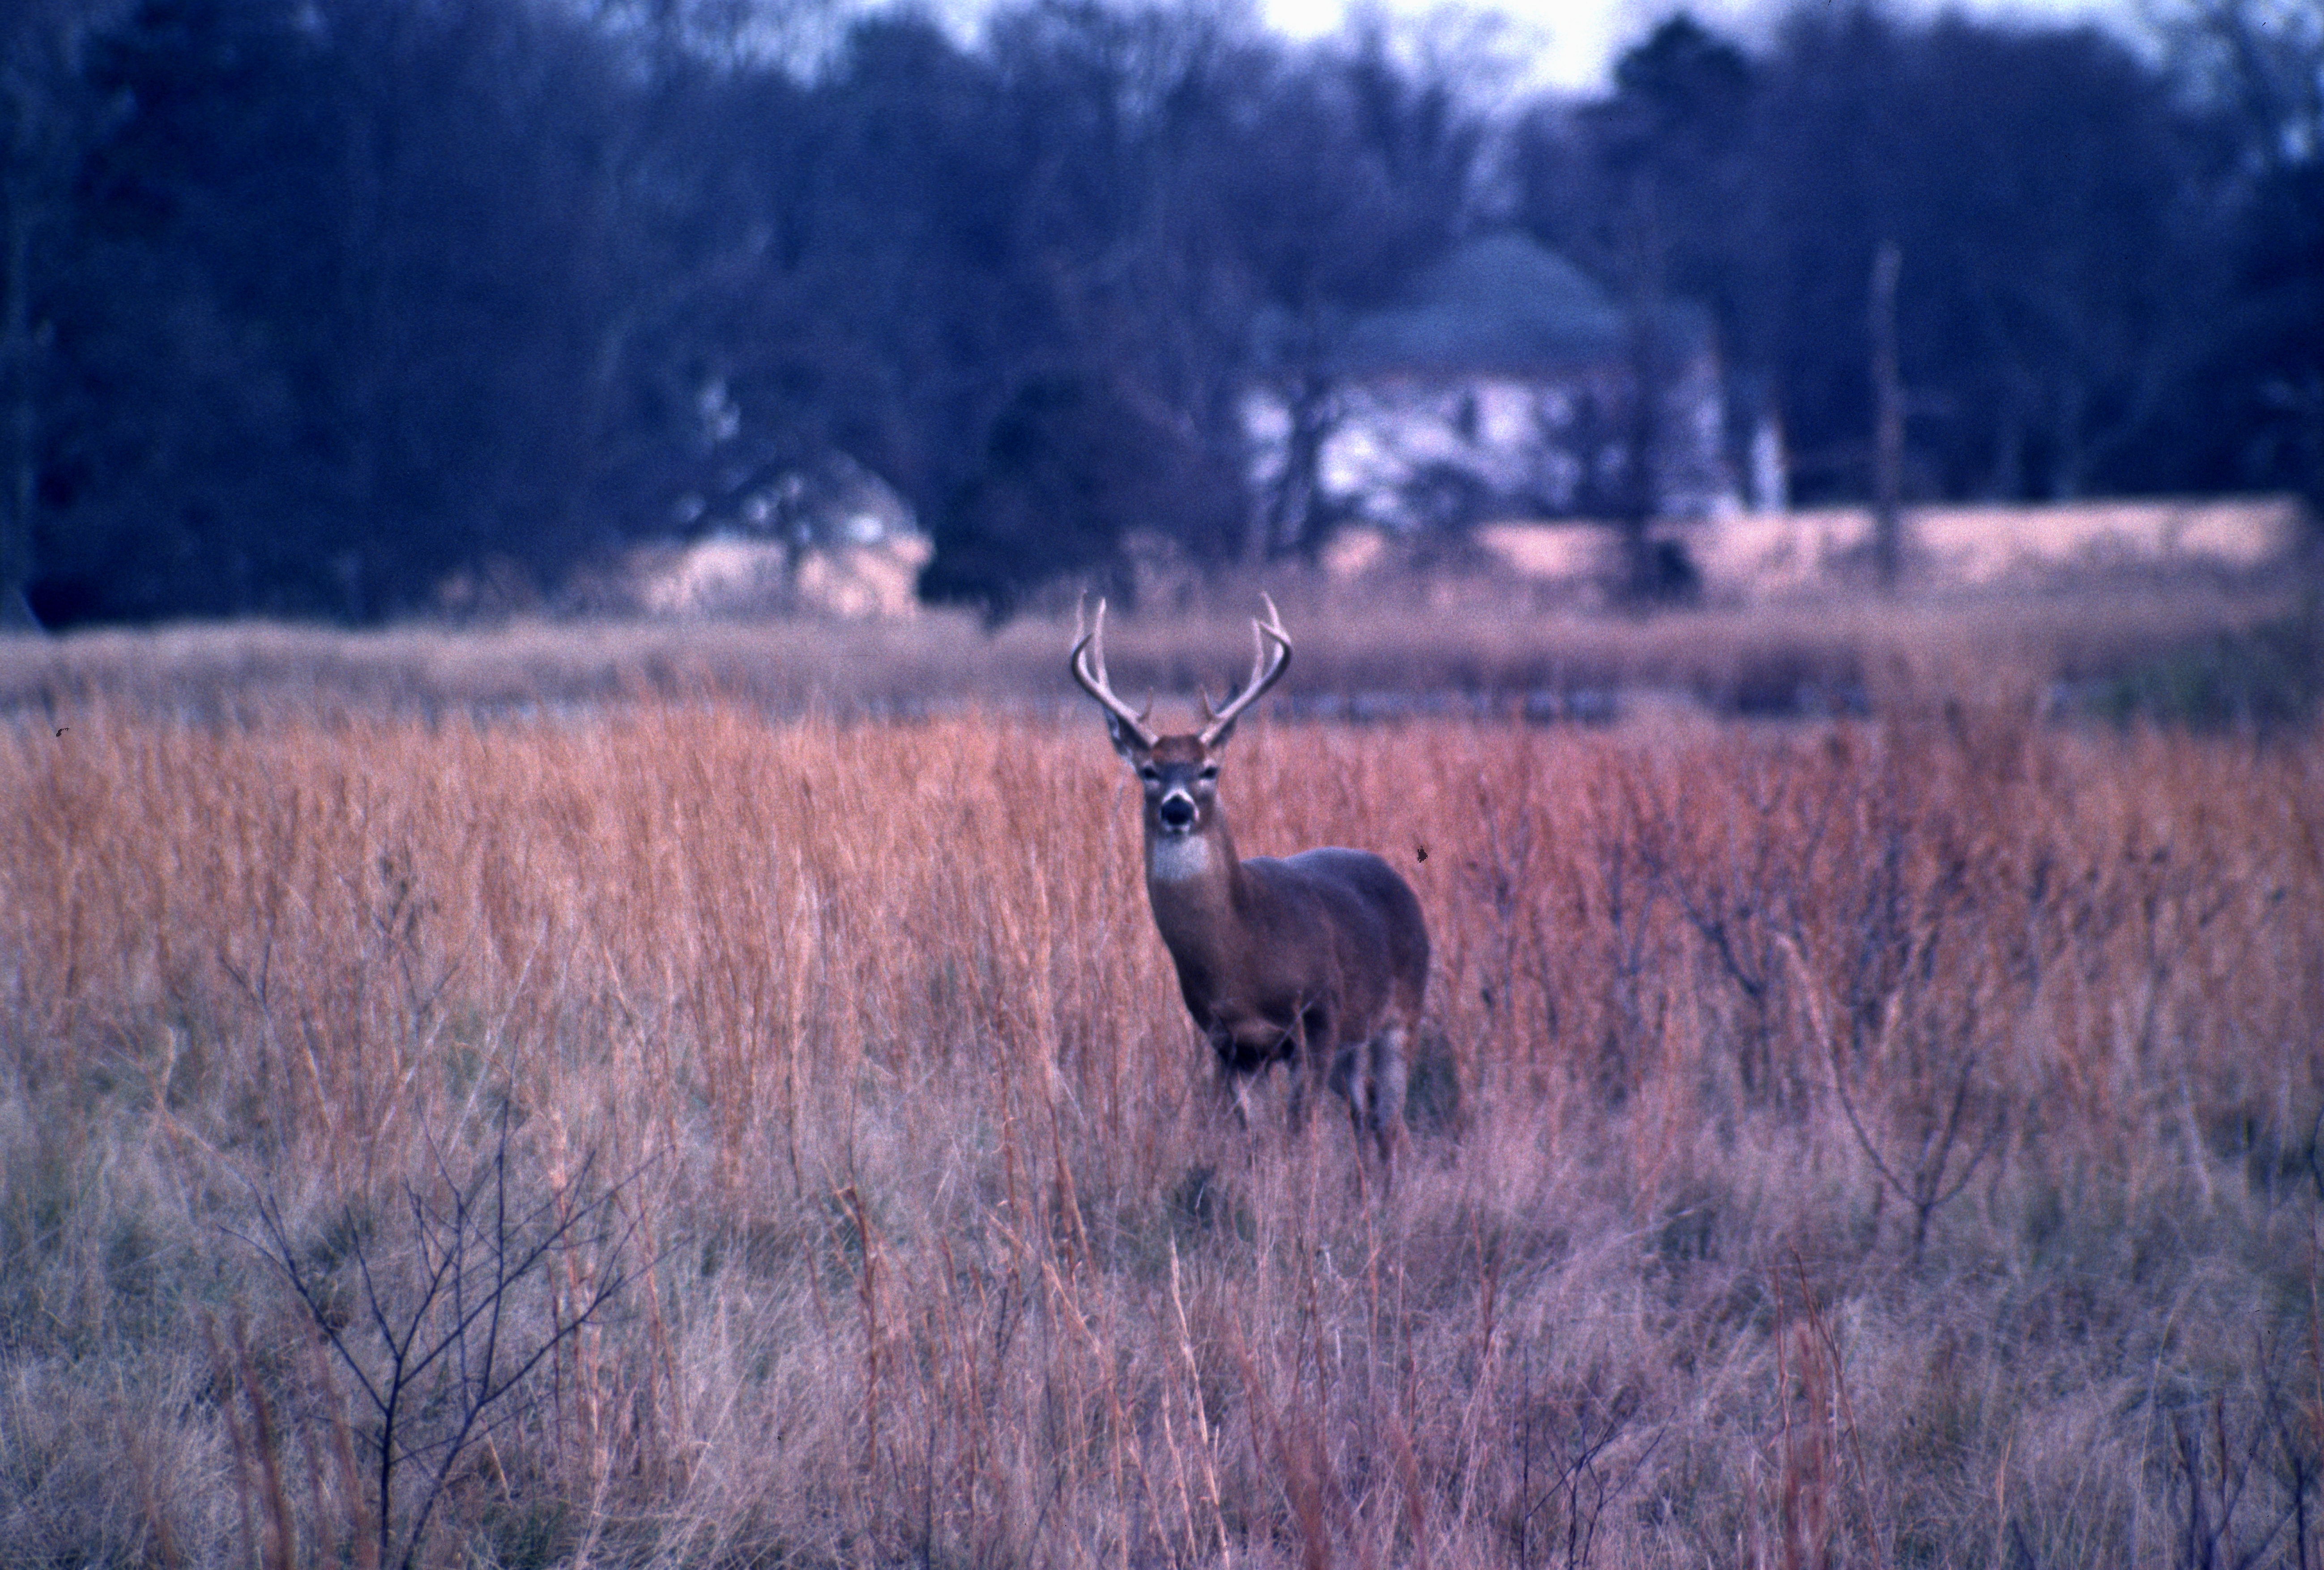 Large antlered buck stands in a field of saltmarsh grass